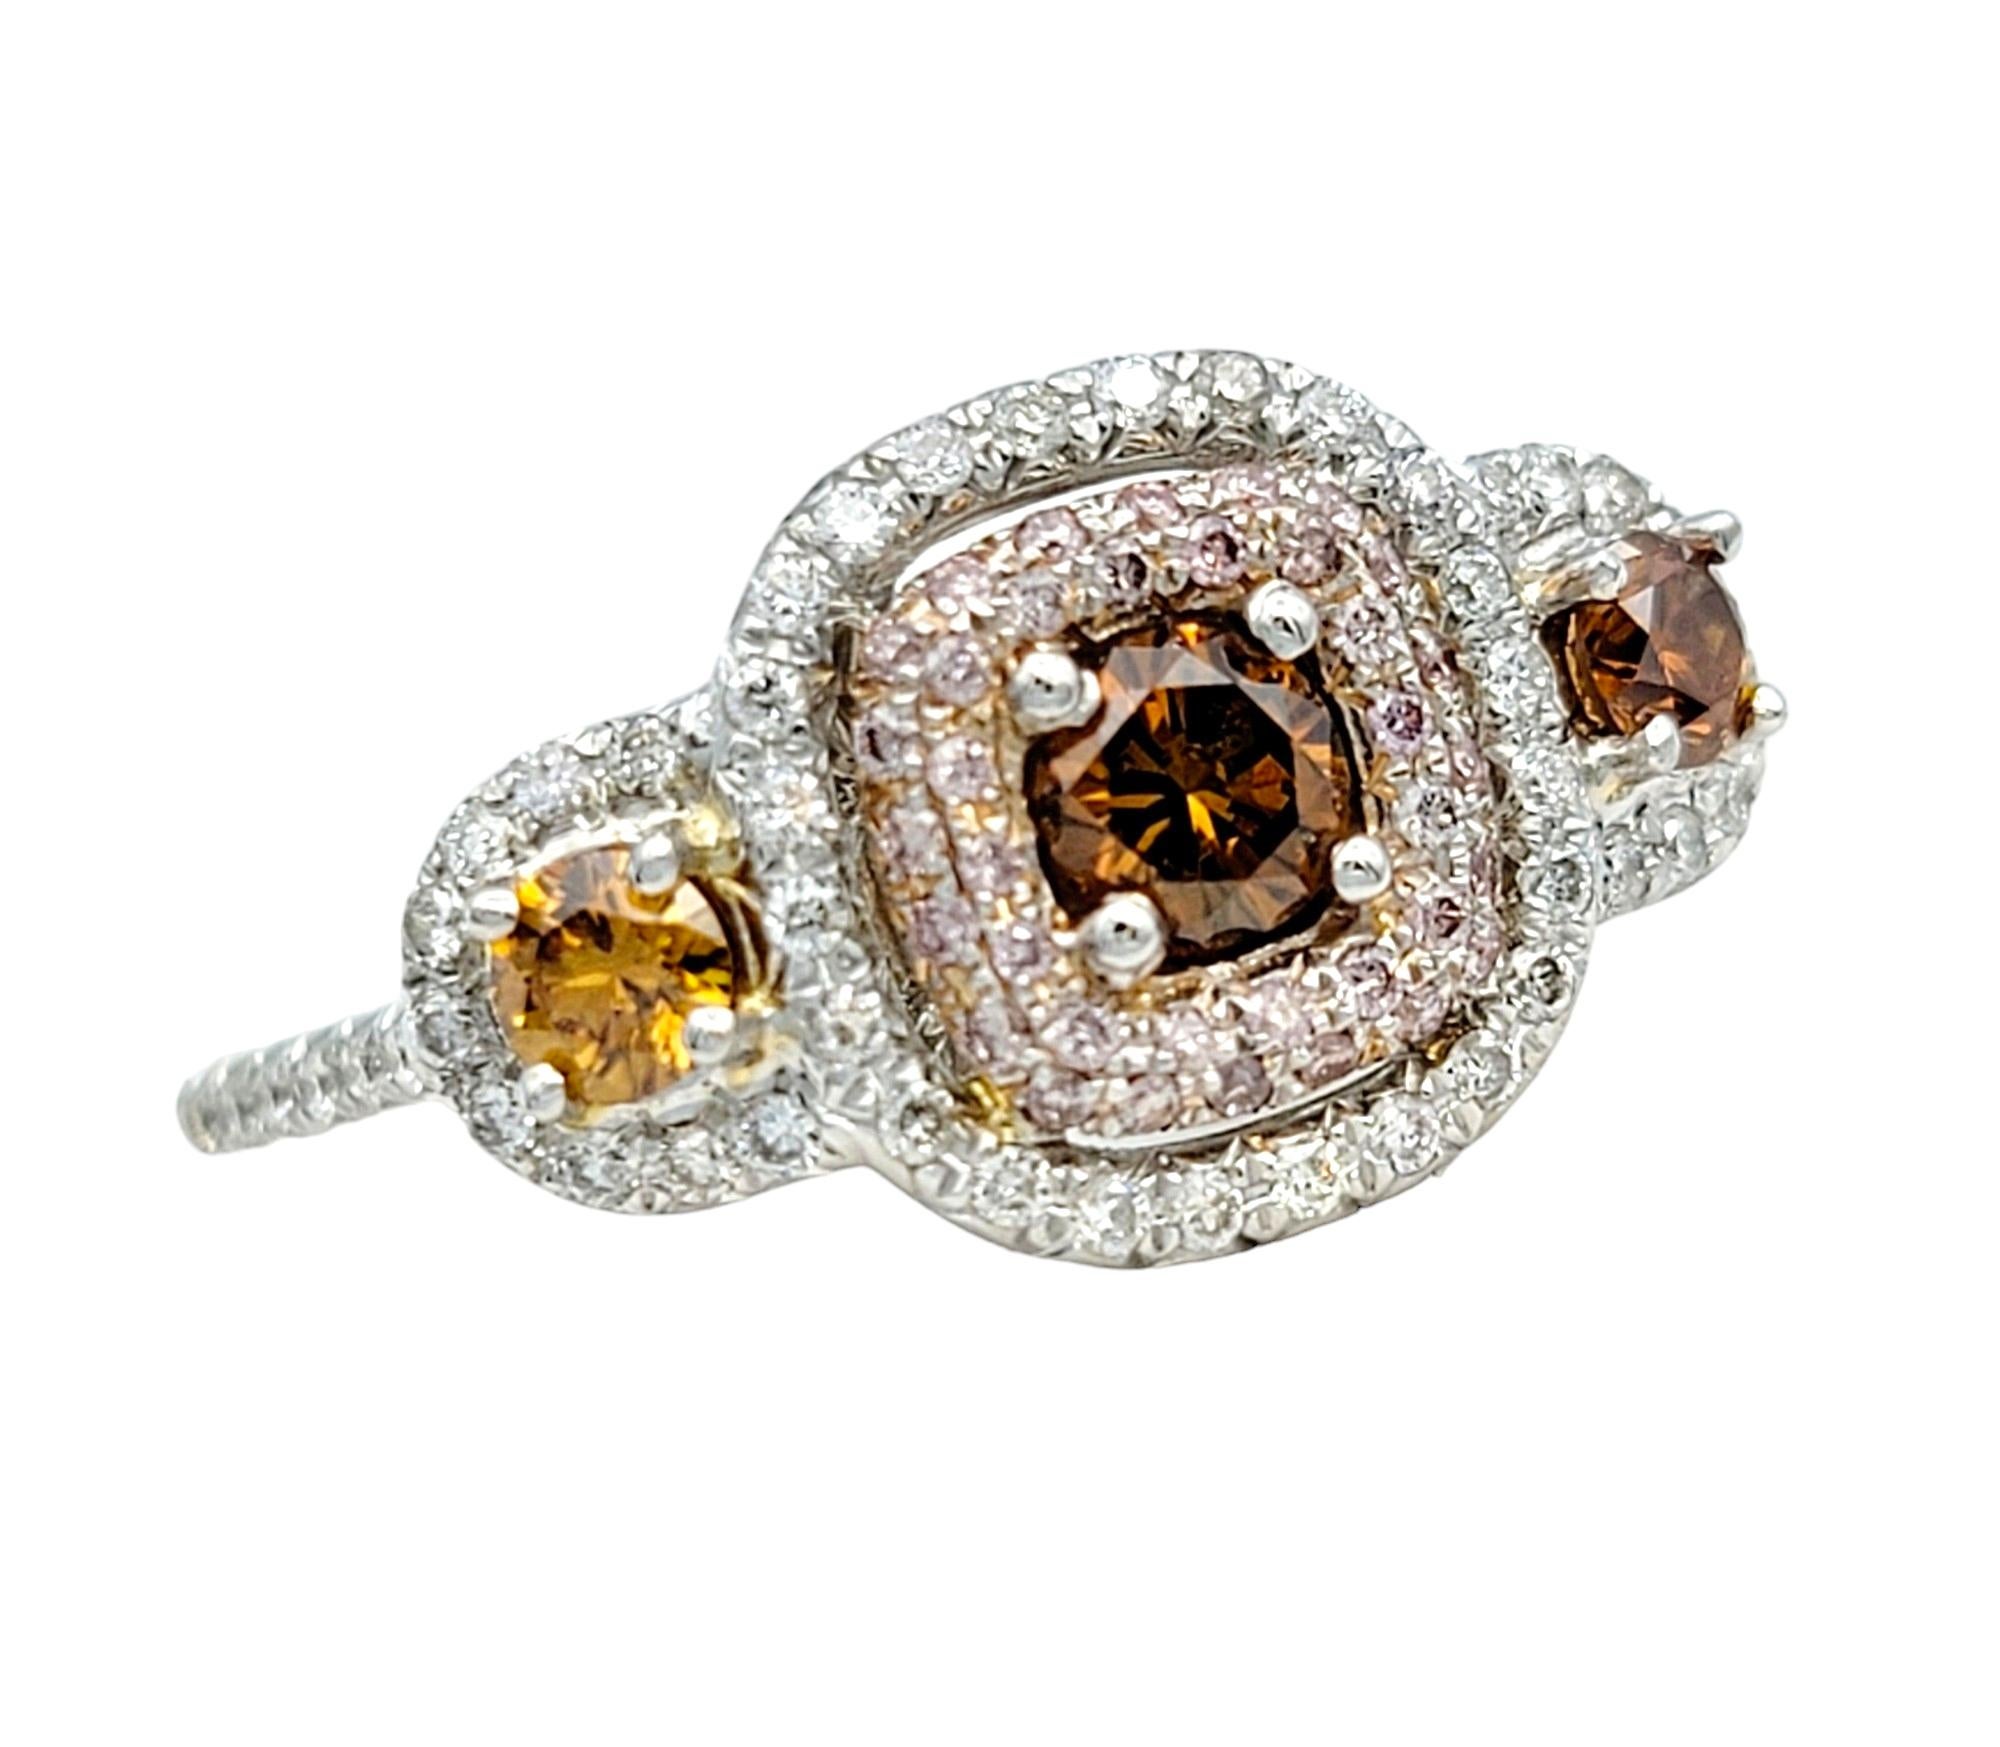 Ring Size: 7

This gorgeous three-stone style ring, crafted in luxurious 18 karat white gold, is a mesmerizing display of color and elegance. At its heart, brownish-orange diamonds stand out with radiant allure, each encircled by a squared halo of